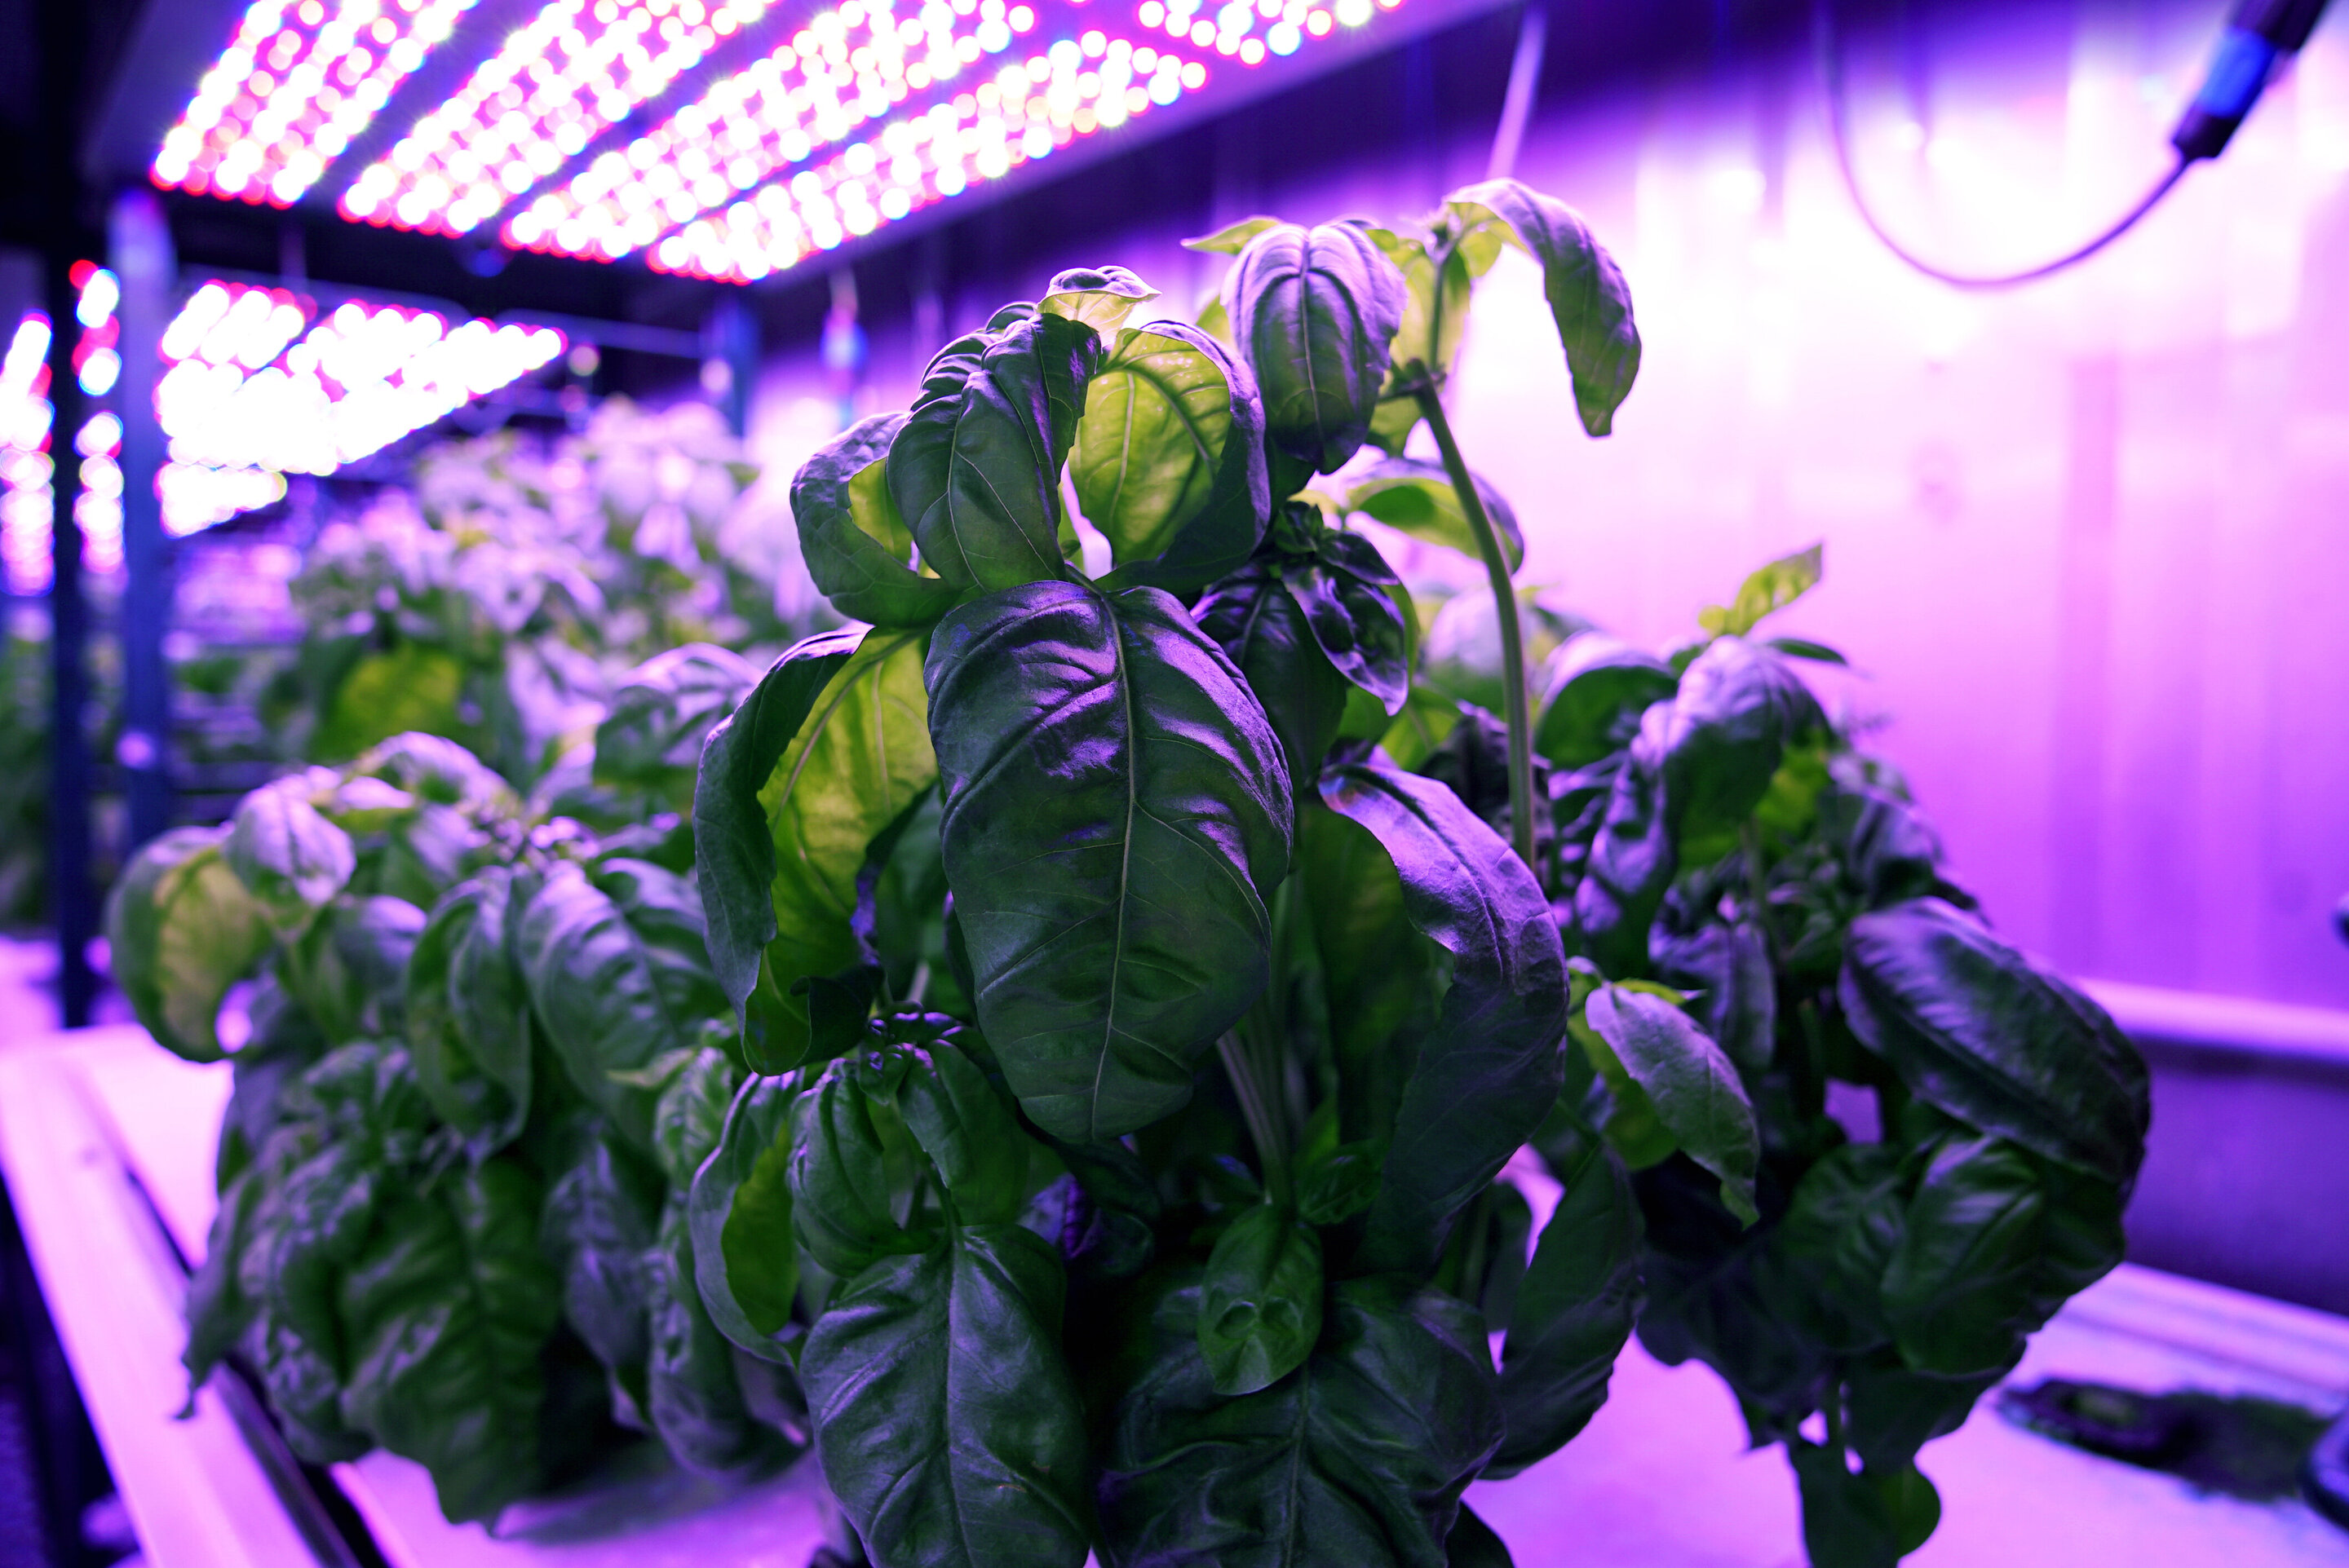 Agriculture: Machine learning can reveal optimal growing conditions to  maximize taste, other features